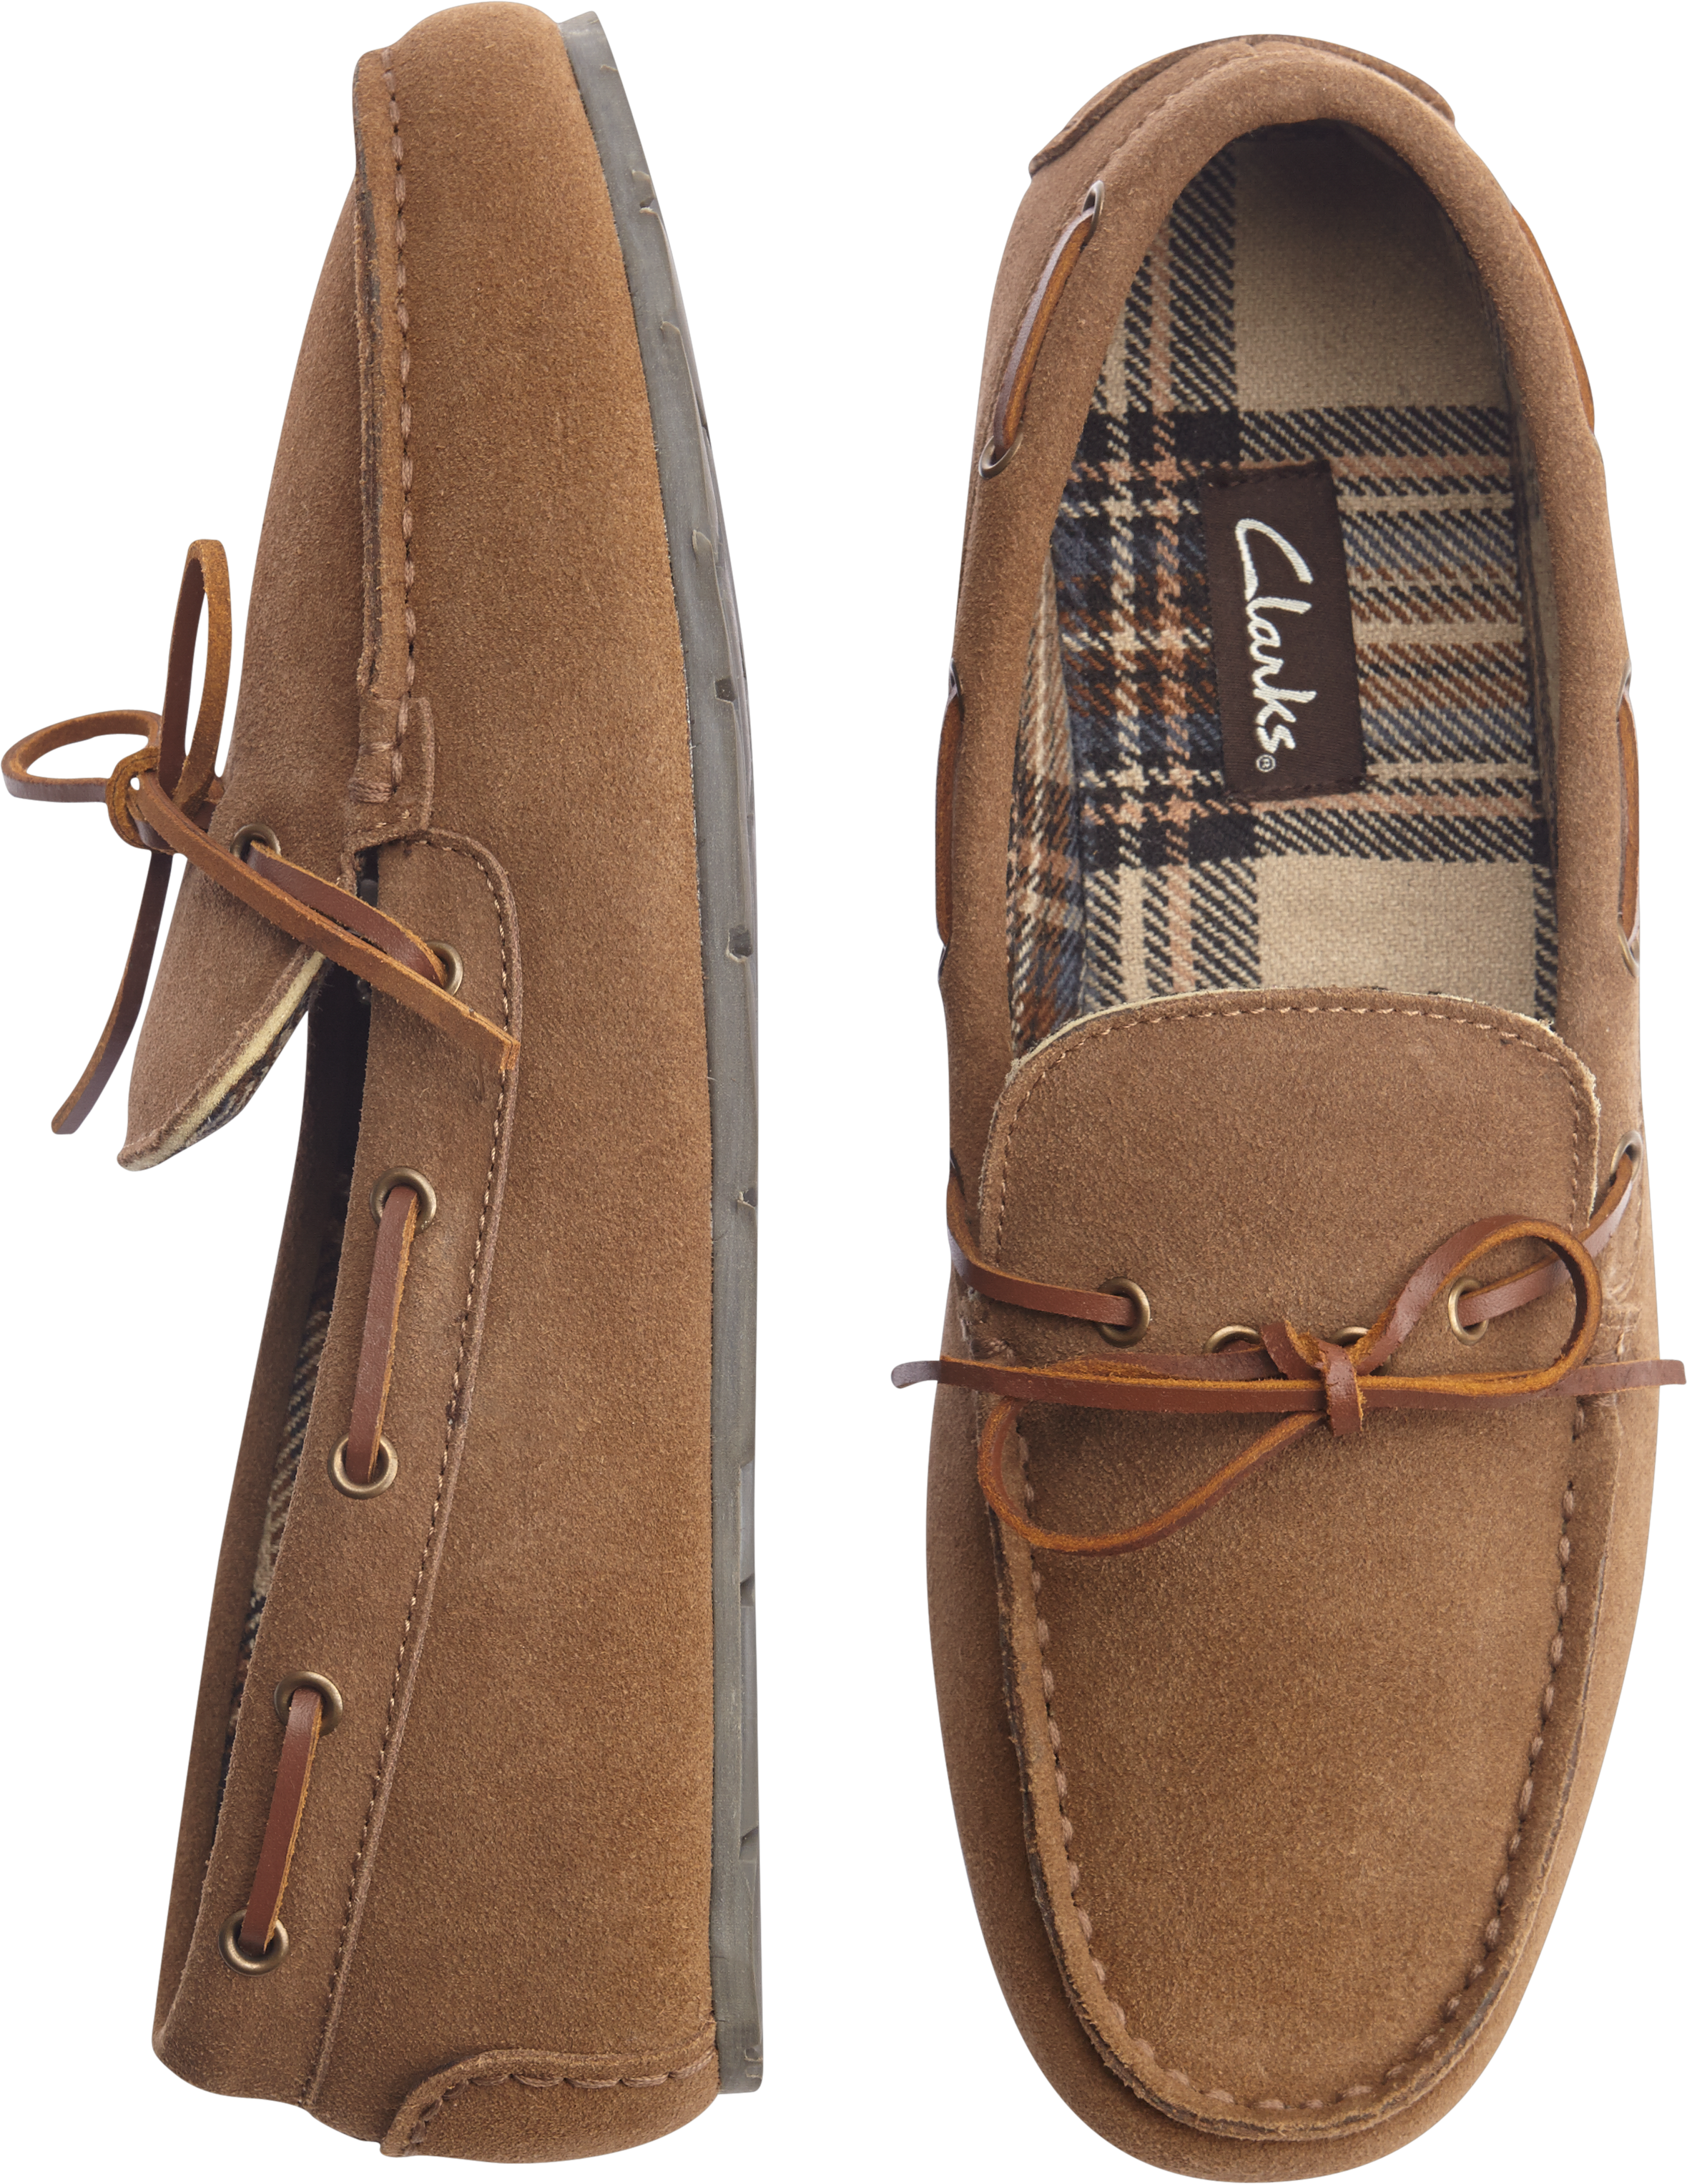 clarks moccasin